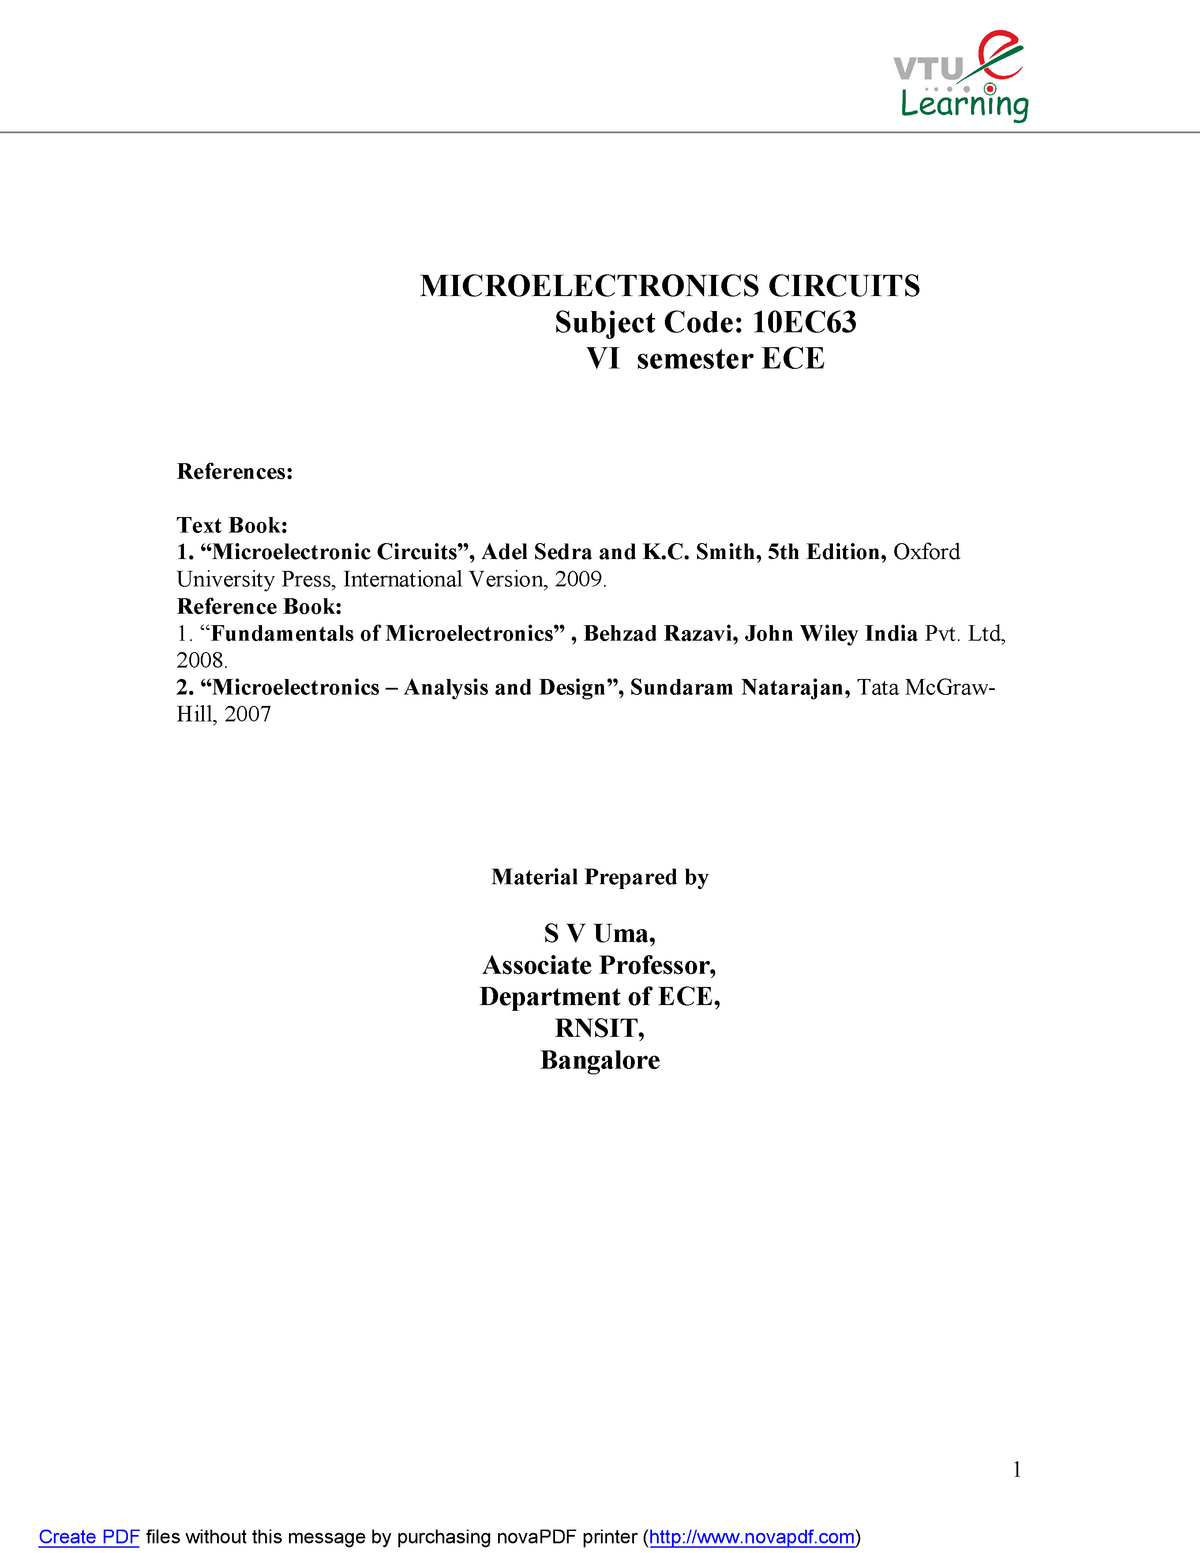 sedra and smith microelectronic circuits citation